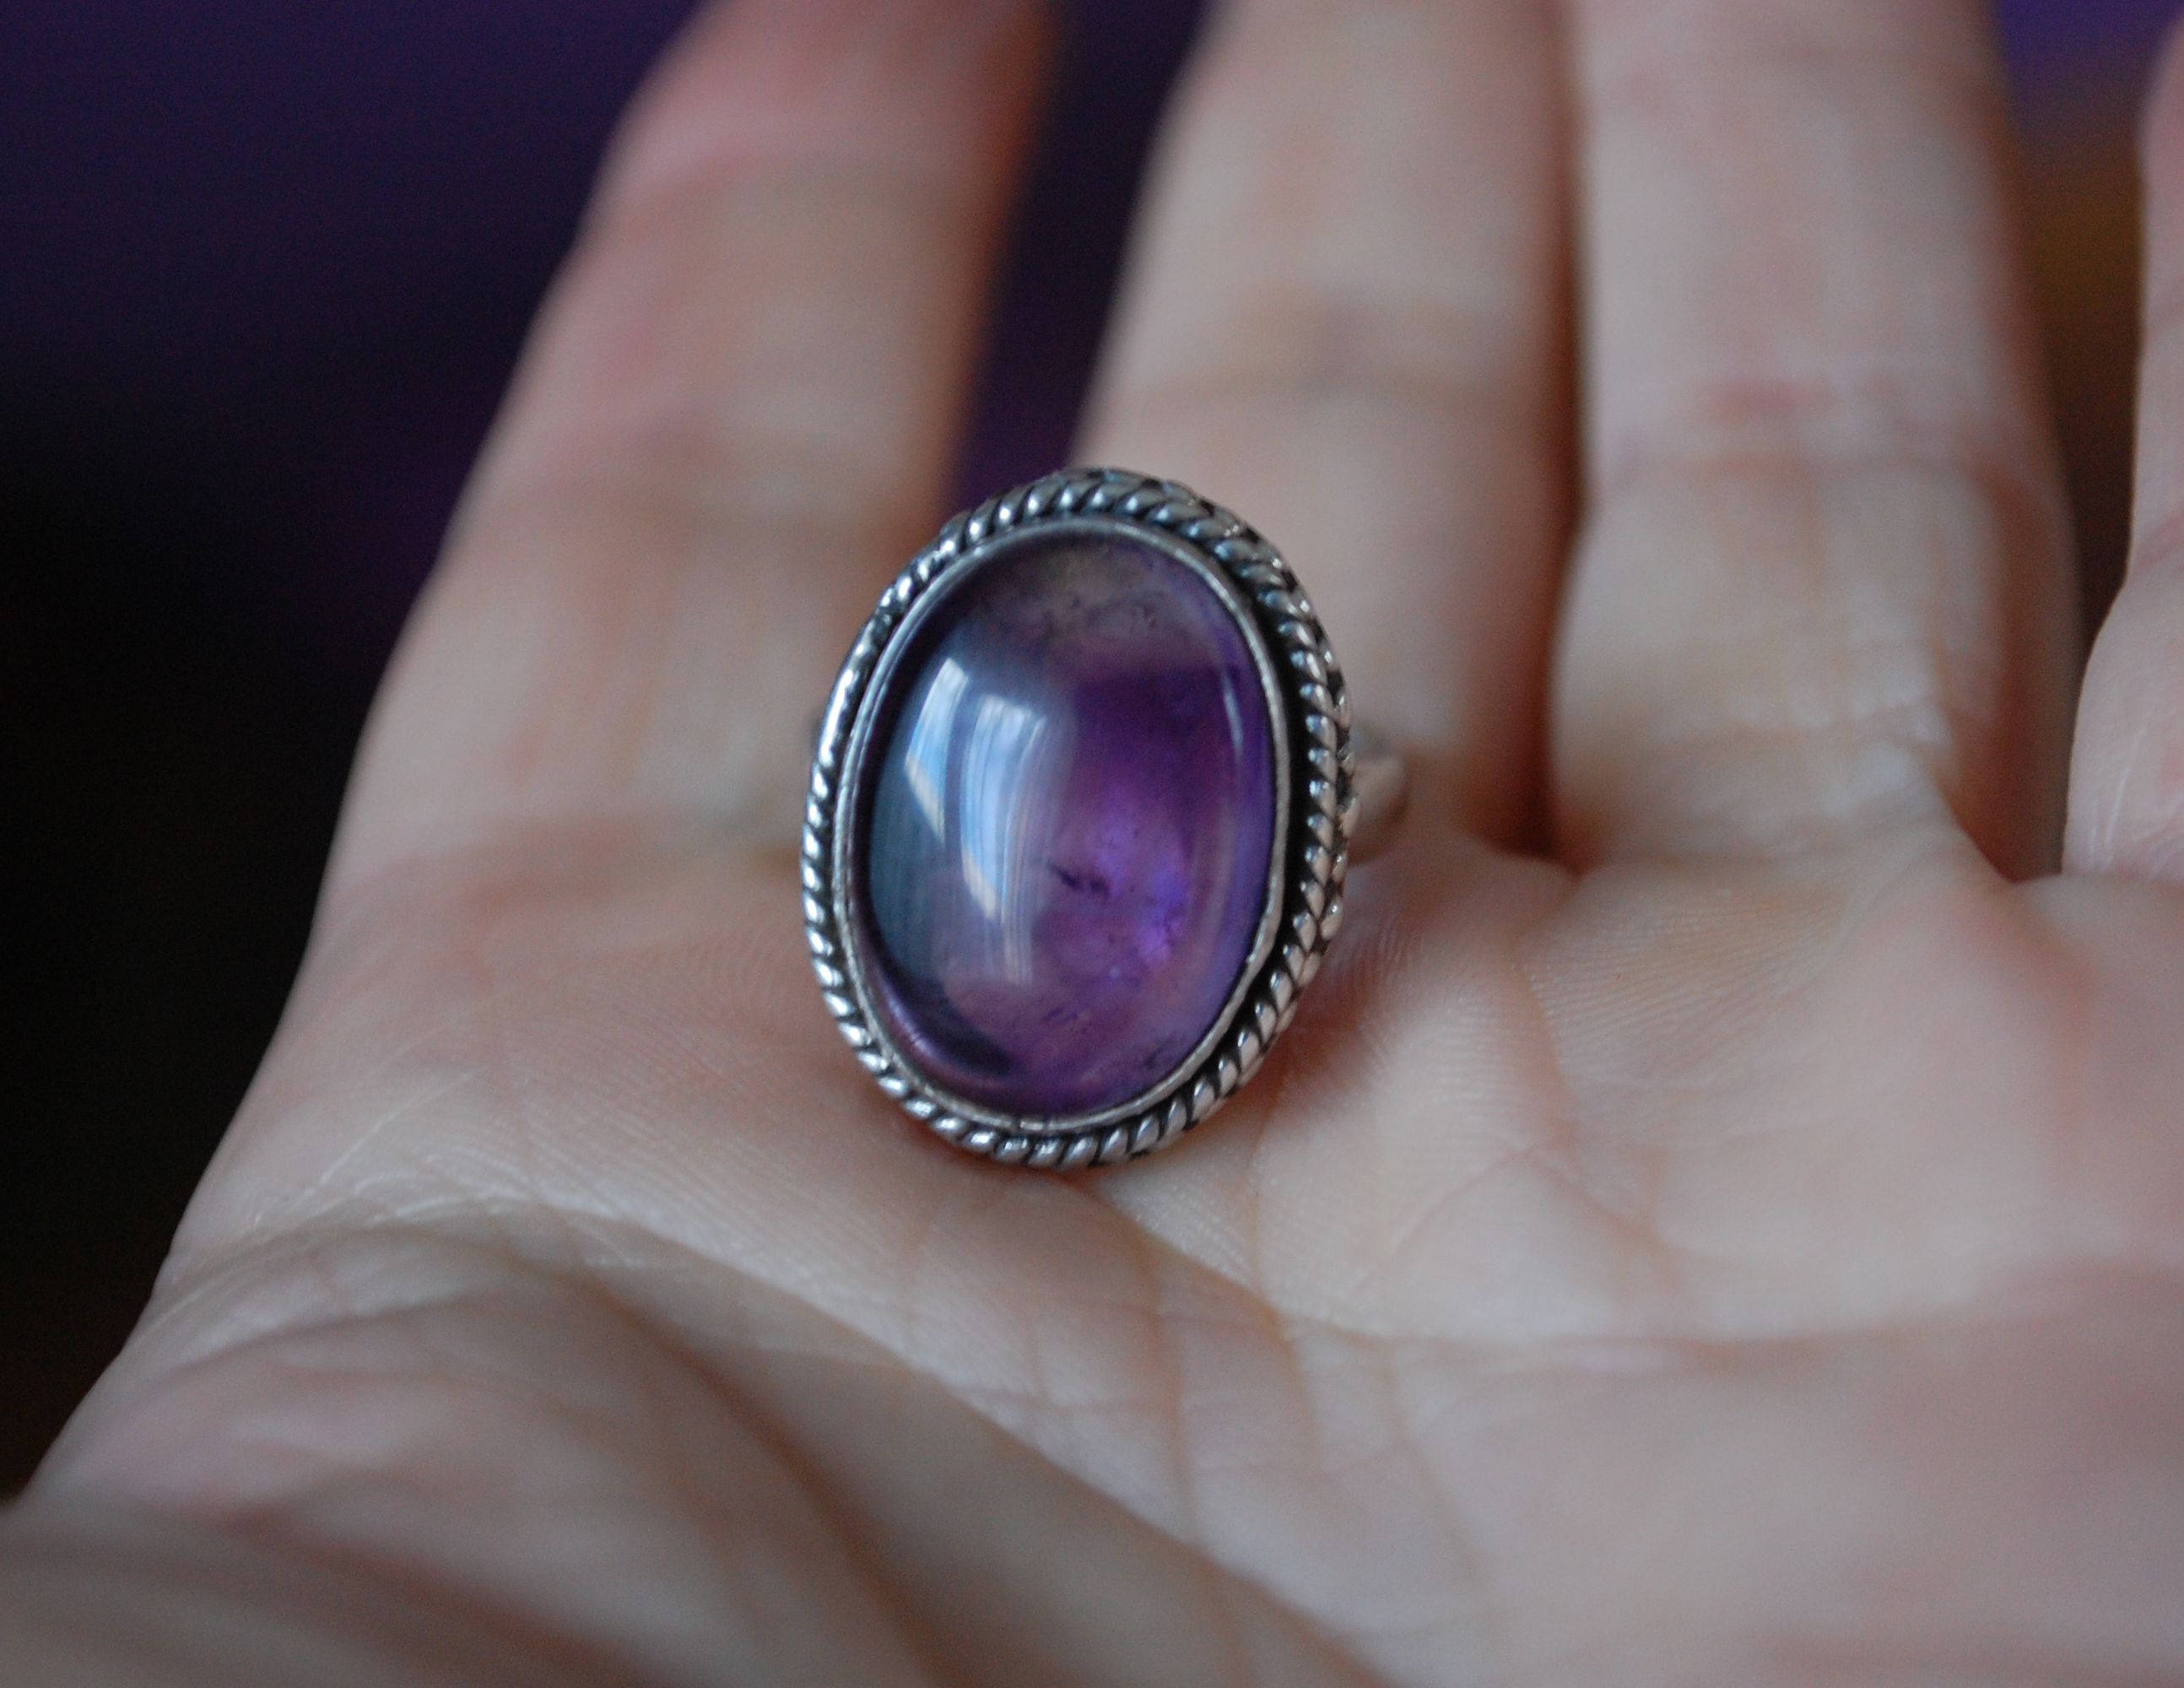 Amethyst Ring from India - Size 4.5 - Indian Amethyst Ring - Ethnic Amethyst Ring - Indian Jewelry - Ethnic Ring - Amethyst Ring